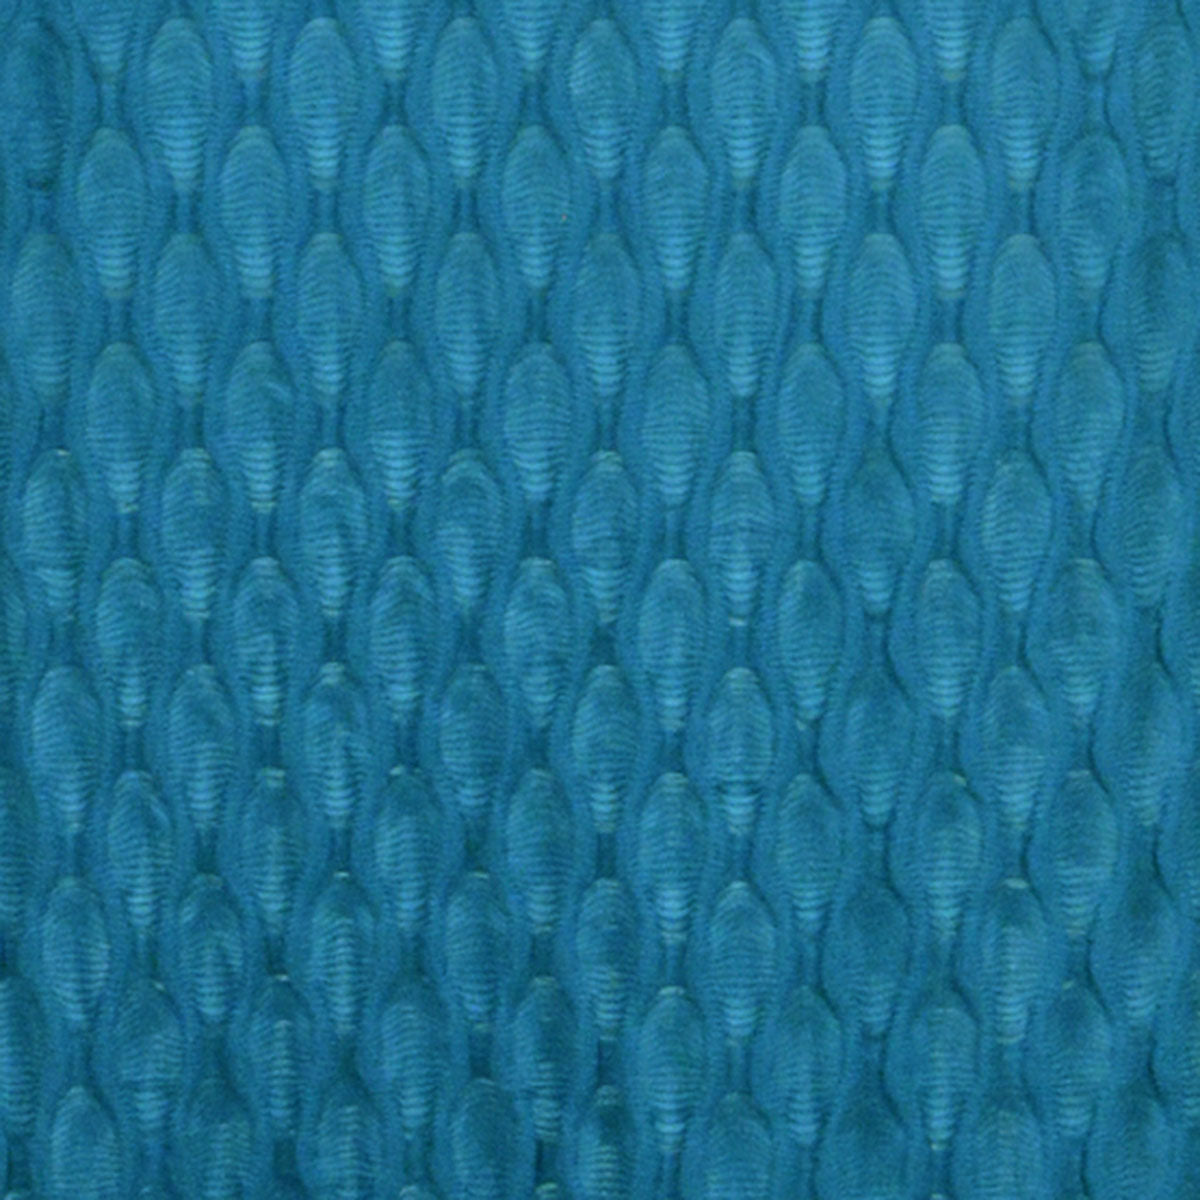 Swatch of Gray fabric from the LYC/Pandemonium Seattle Fractal Collection.